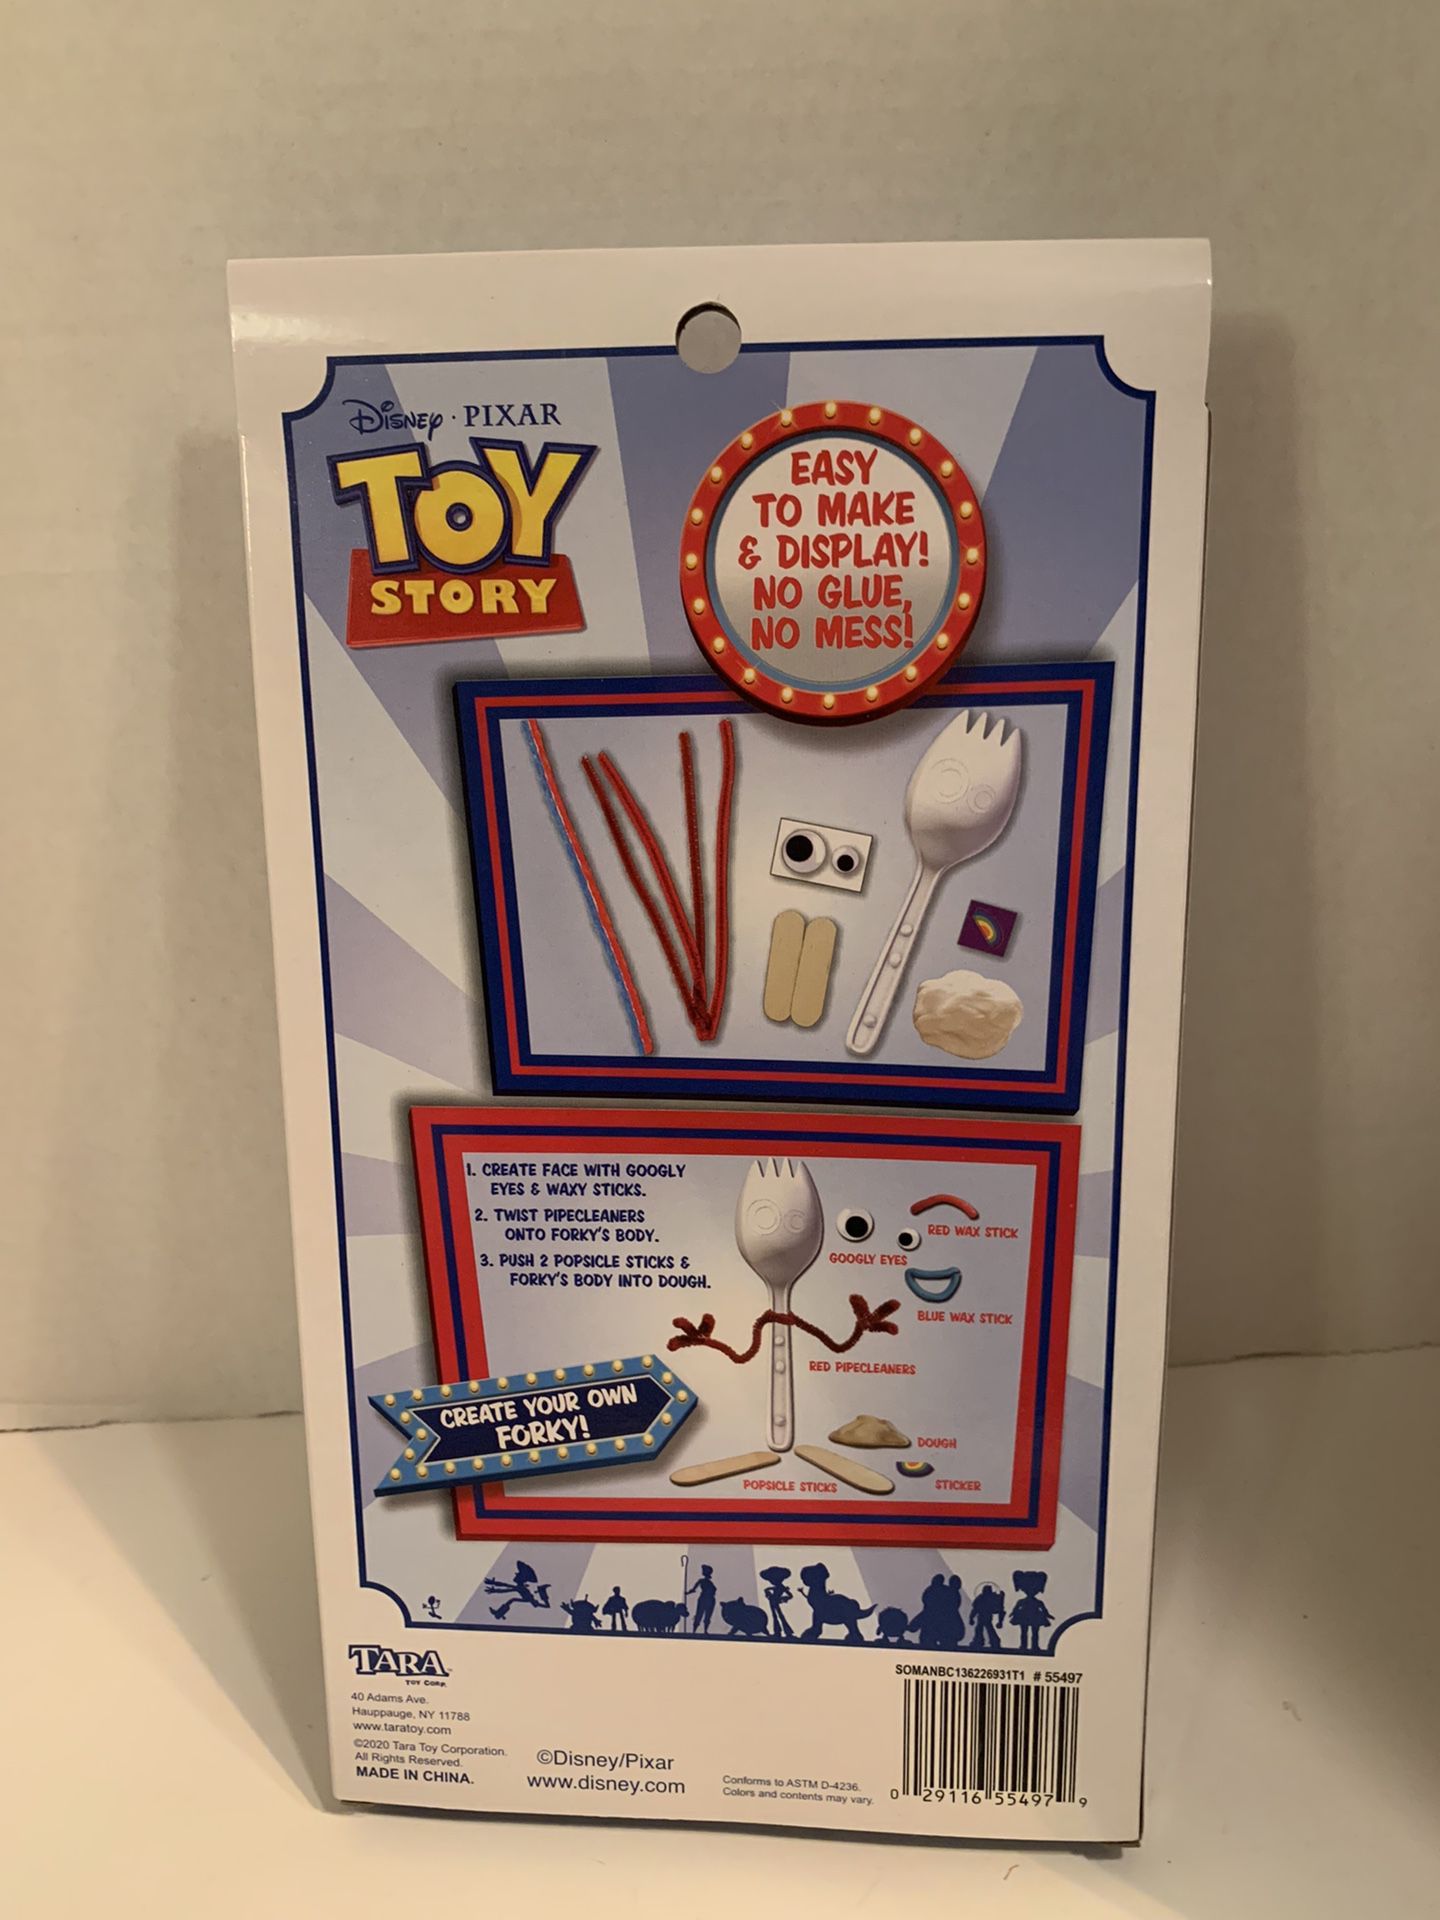 Disney Pixar Toy Story 4 Make Your Own Forky - DIY Kids Toy - Easy No Glue  Mess 29116554979